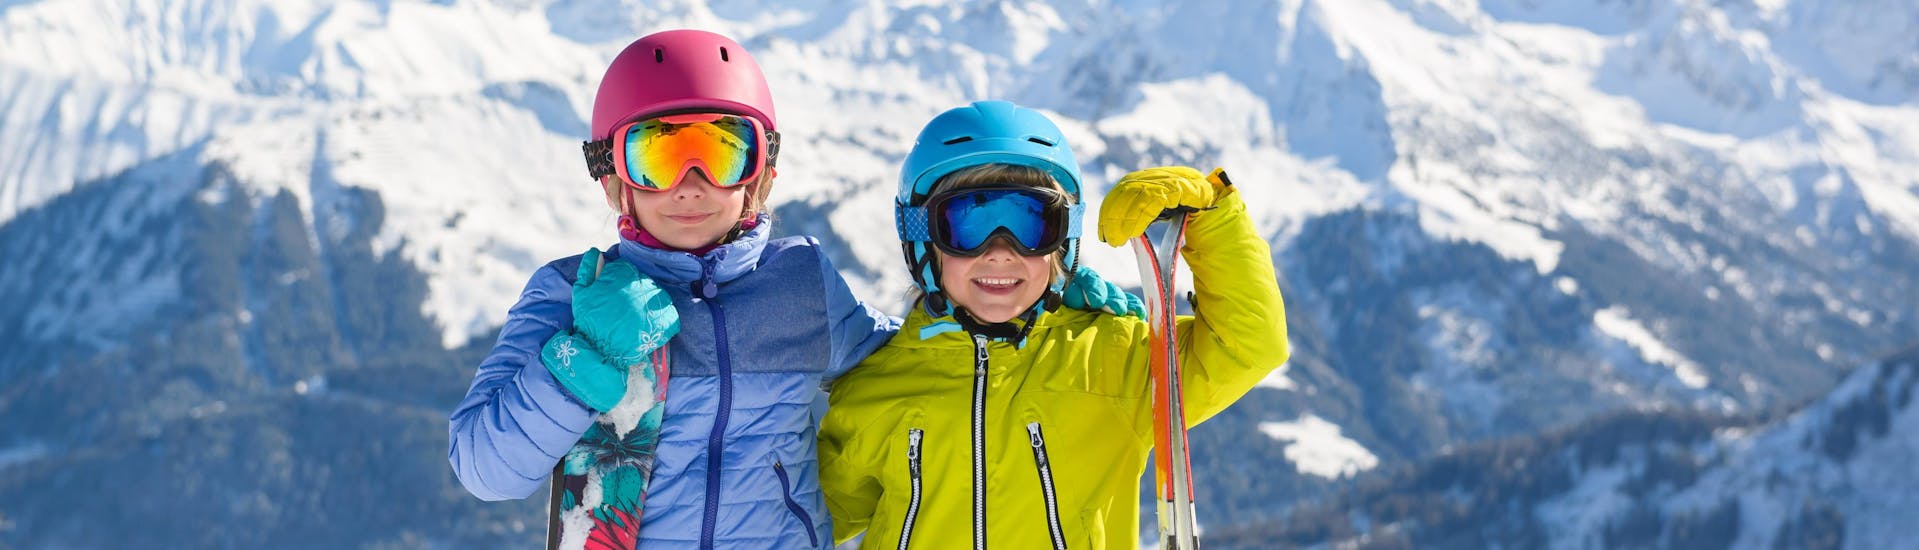 Two children in full skiing gear are smiling at the camera as they prepare for their kids ski lessons in Ponte di Legno.